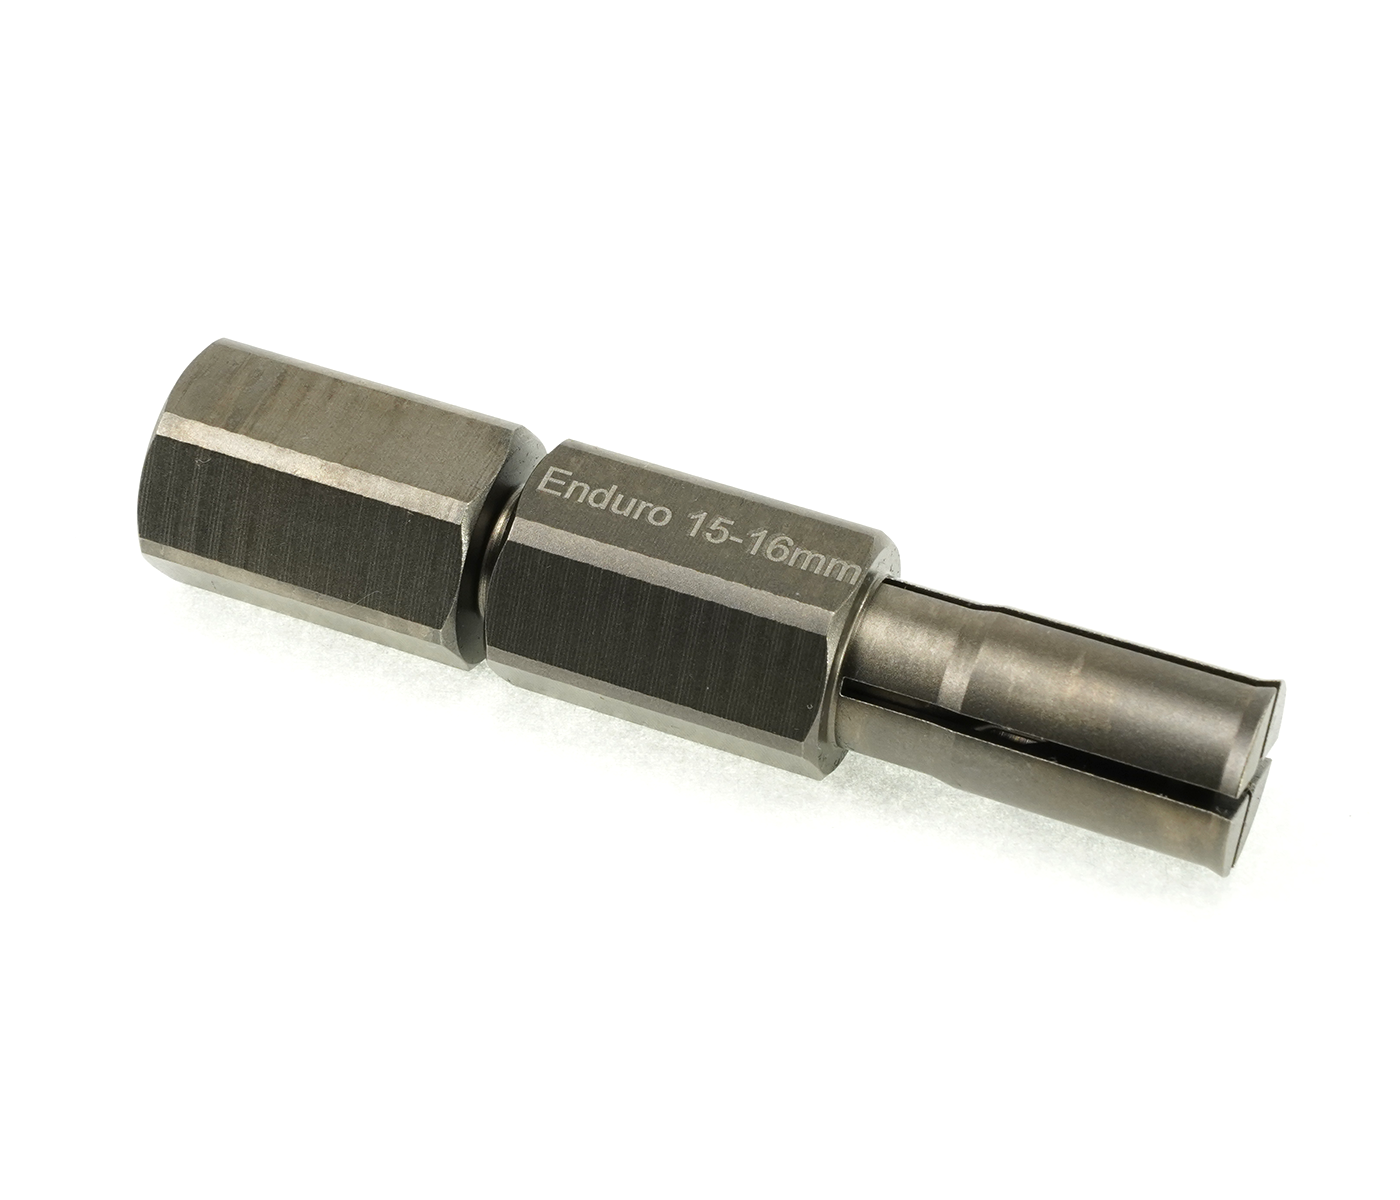 Enduro Puller 15-16 SS - Stainless Steel, Bearing Puller for bearings with 15-16mm IDs